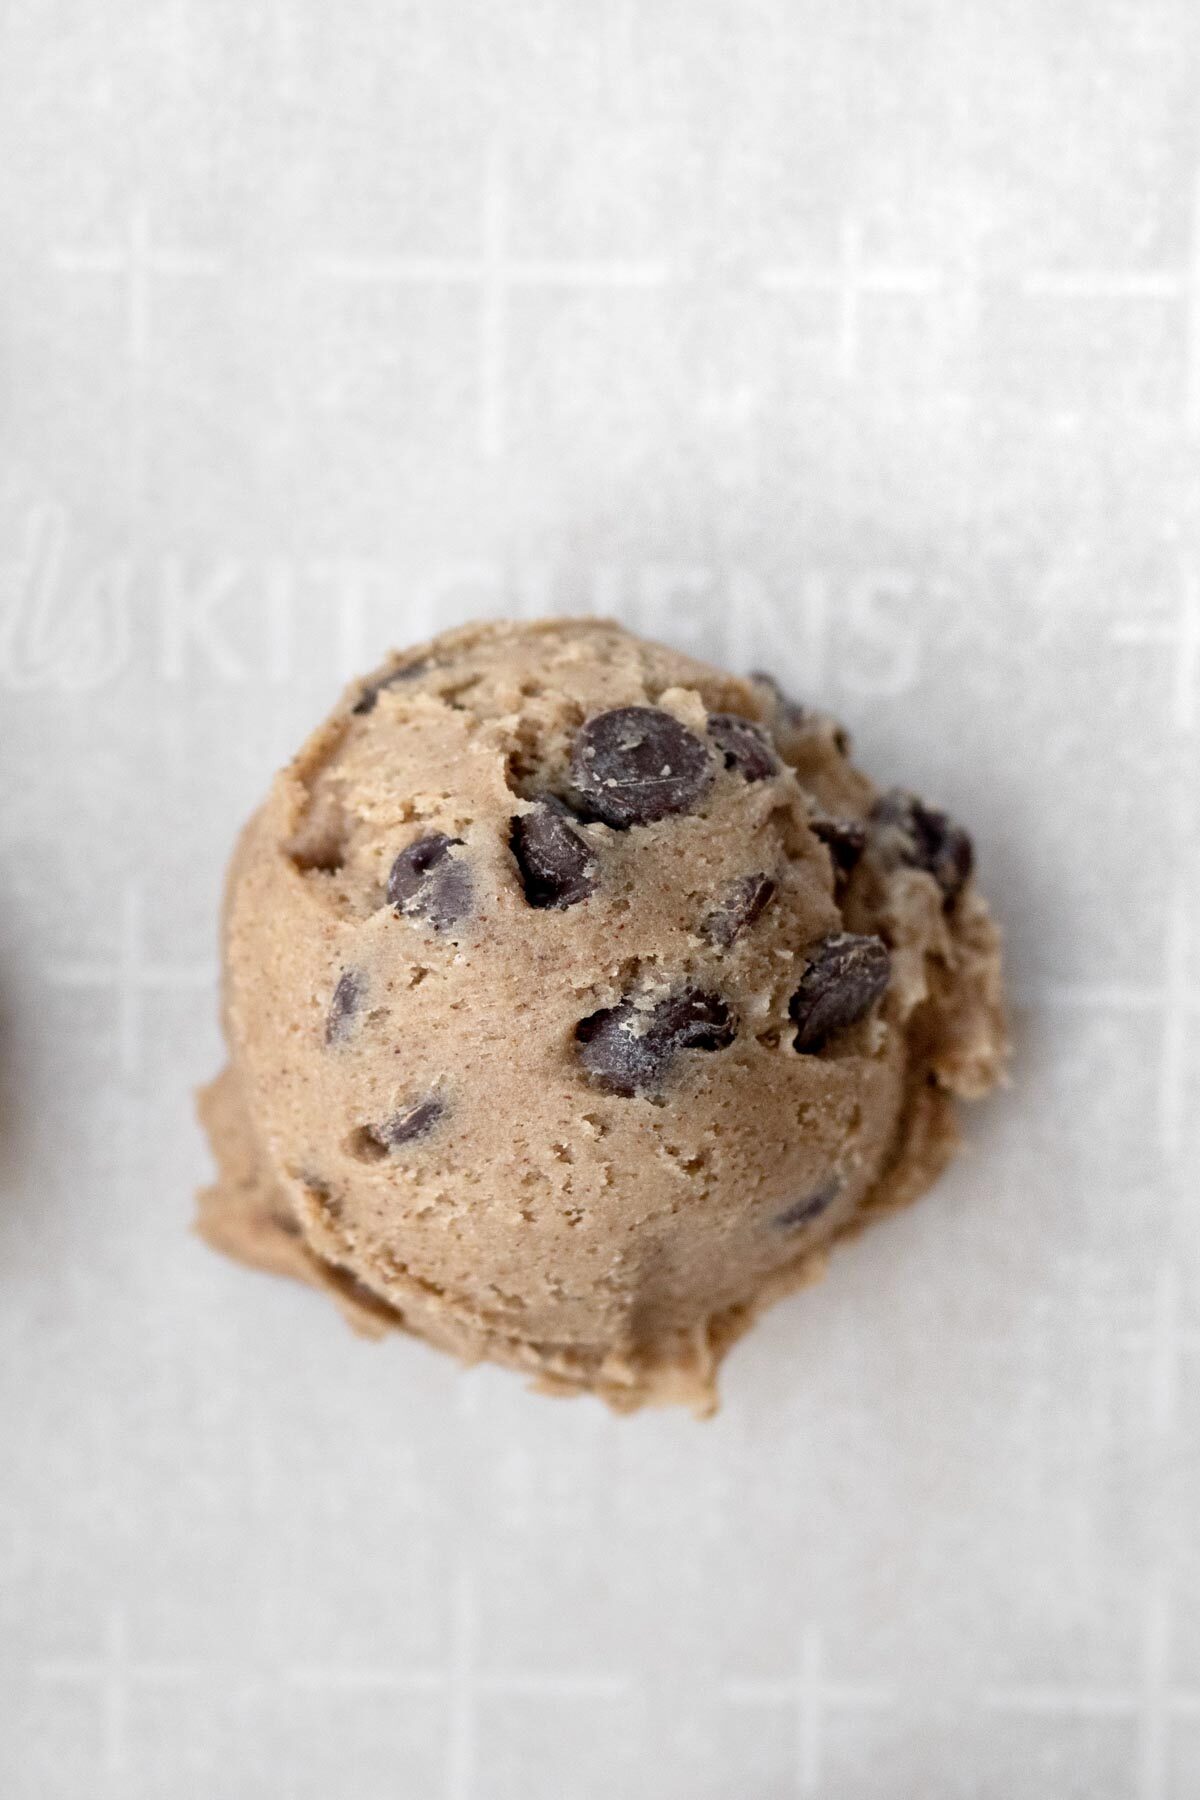 A ball of chocolate chip cookie batter.